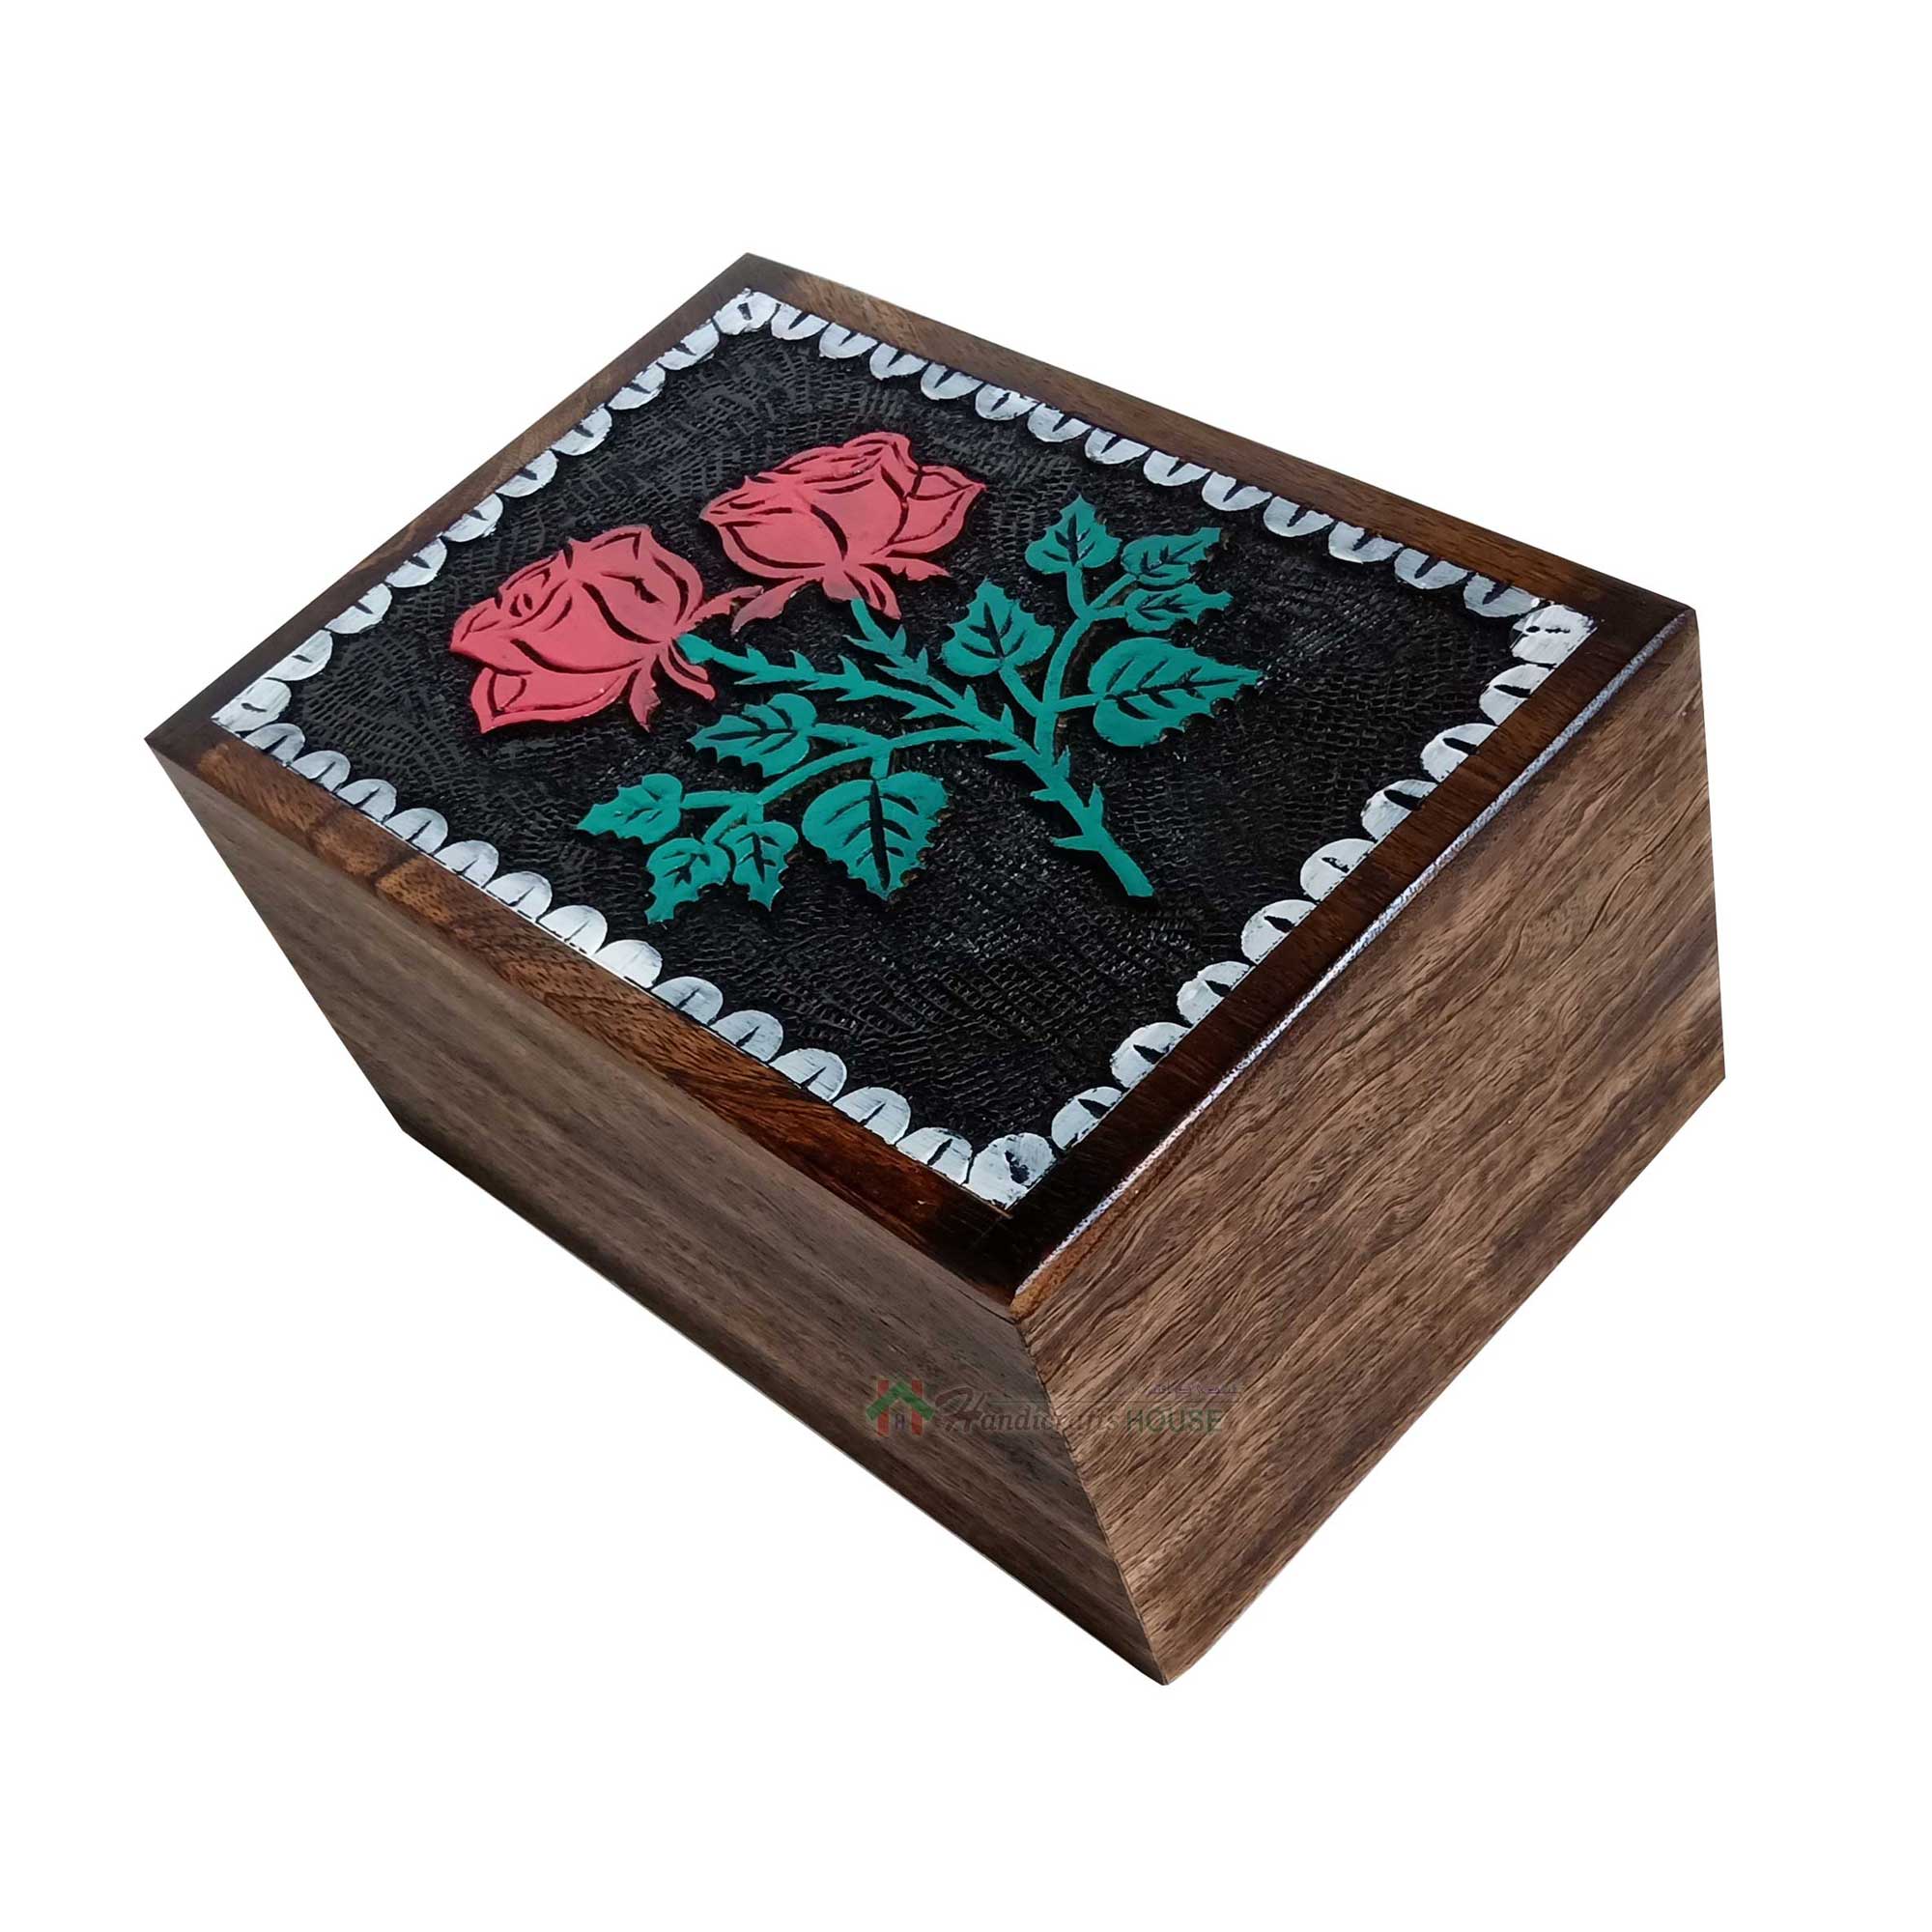 Hands Engraving Rose Flower Wooden Cremation Urns, Wood Funeral Urn for Human or Pet Ashes Adult - Hardwood Memorial Large Box for Loved One